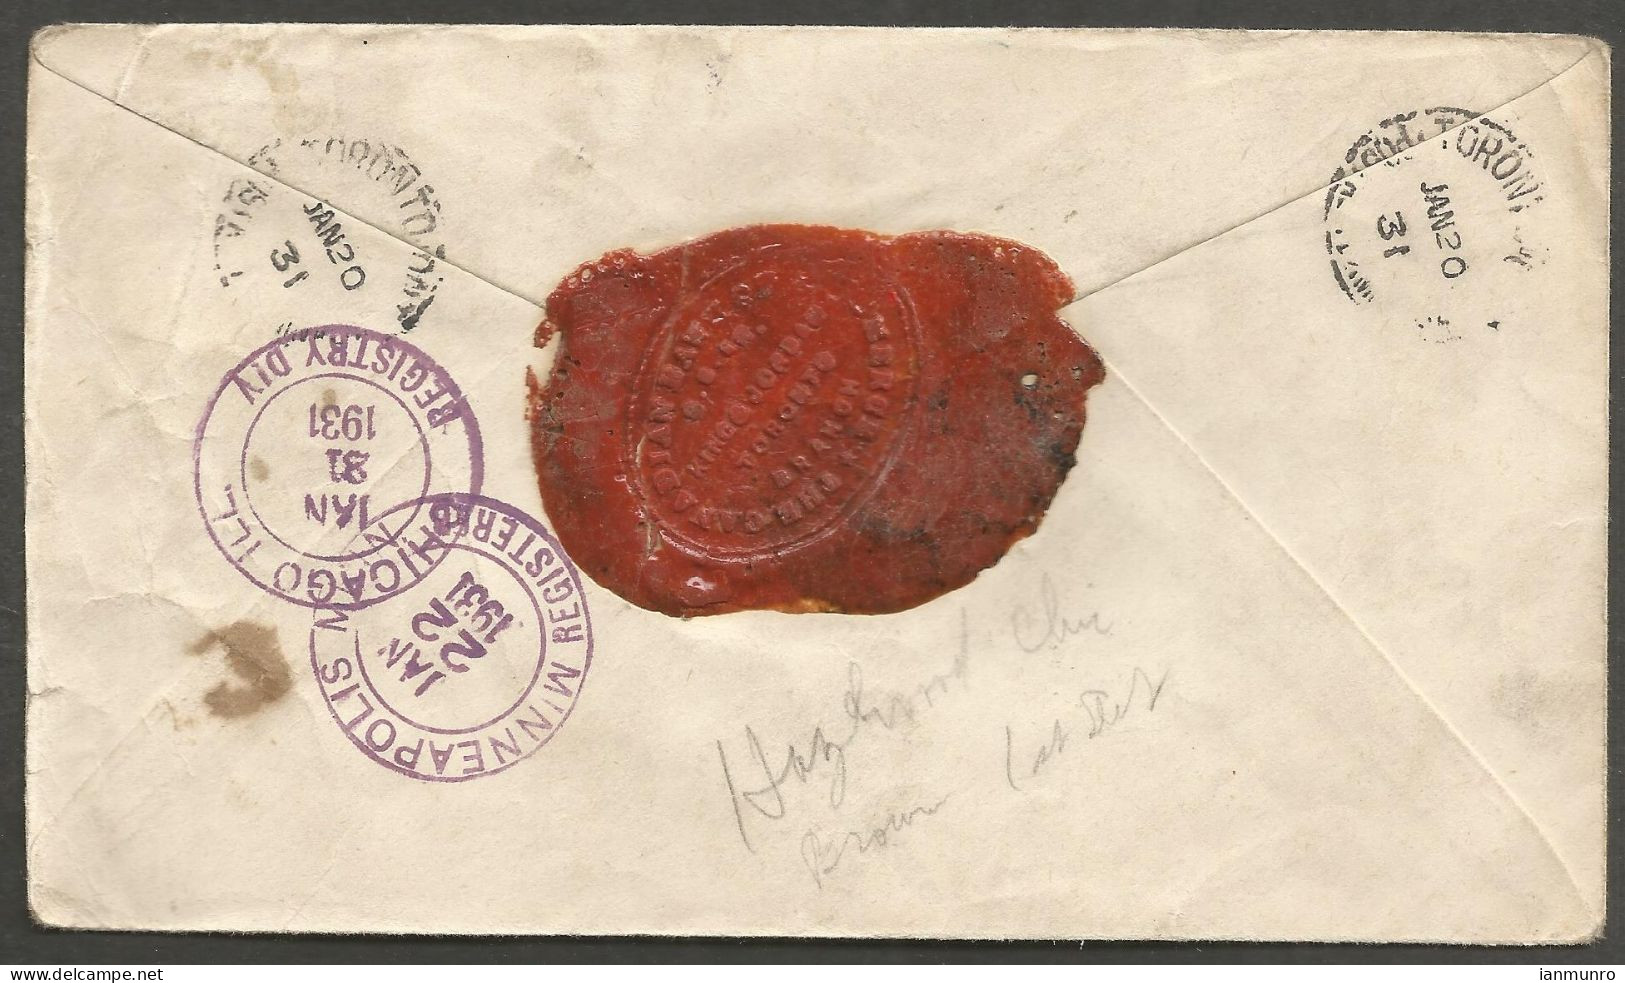 1931 Wax Seal On Bank Of Commerce Registered Cover 15c Arch/Library CDS Toronto Ontario - Postal History